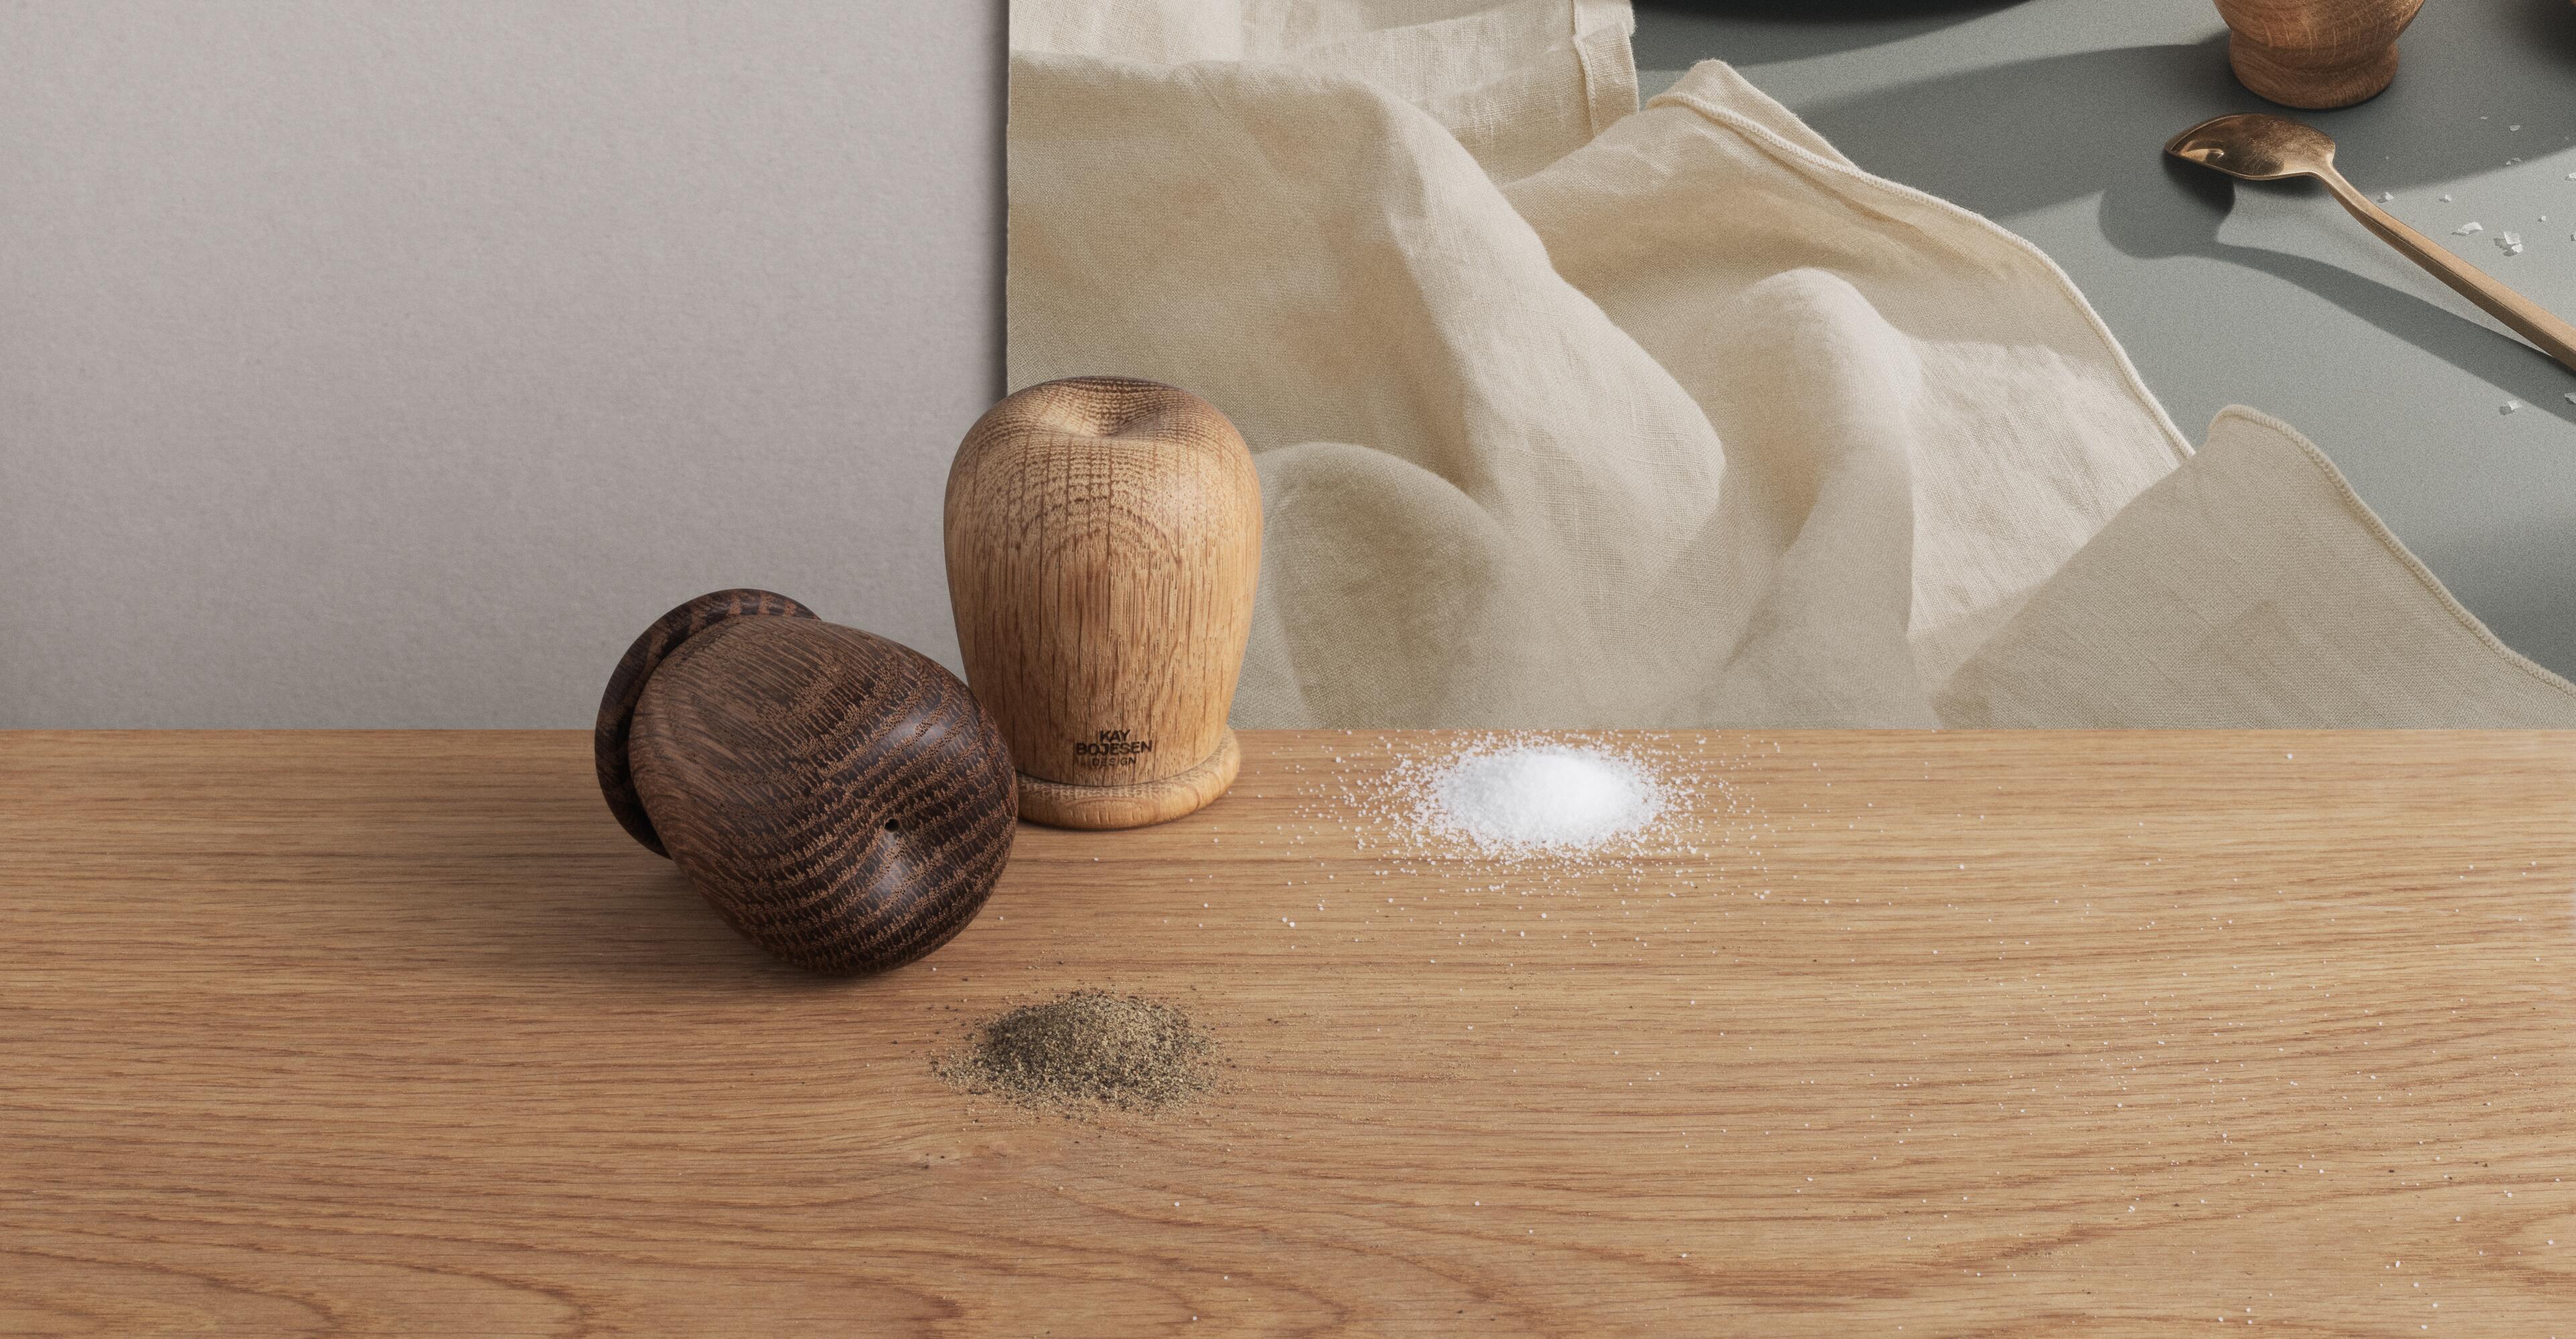 Bring the Danish designer Kay Bojesen to the table with the fine salt and pepper set